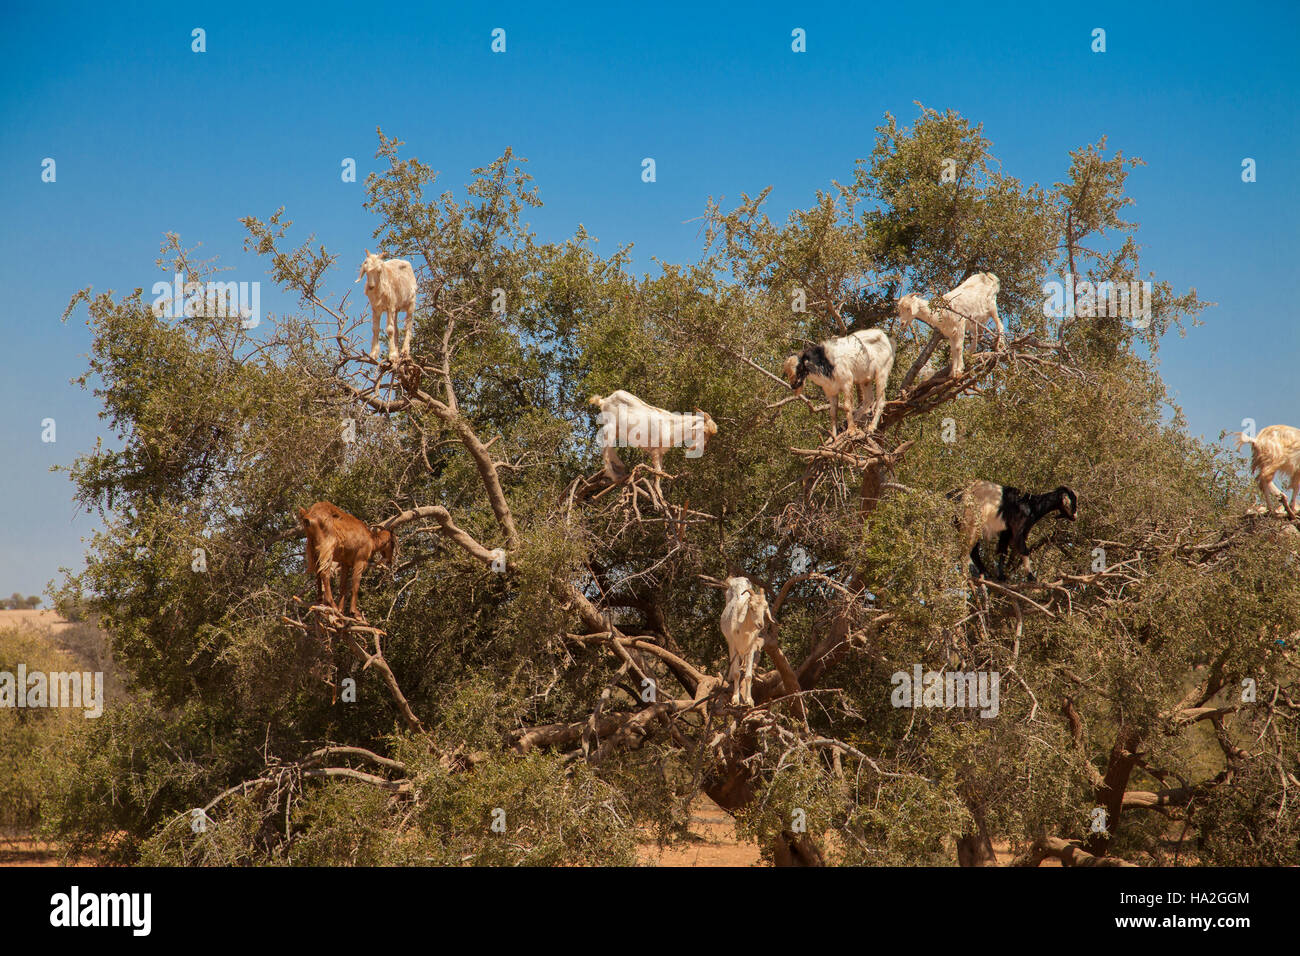 Goats eating Argan nuts on the road between Marrakesh and Essouira Stock Photo